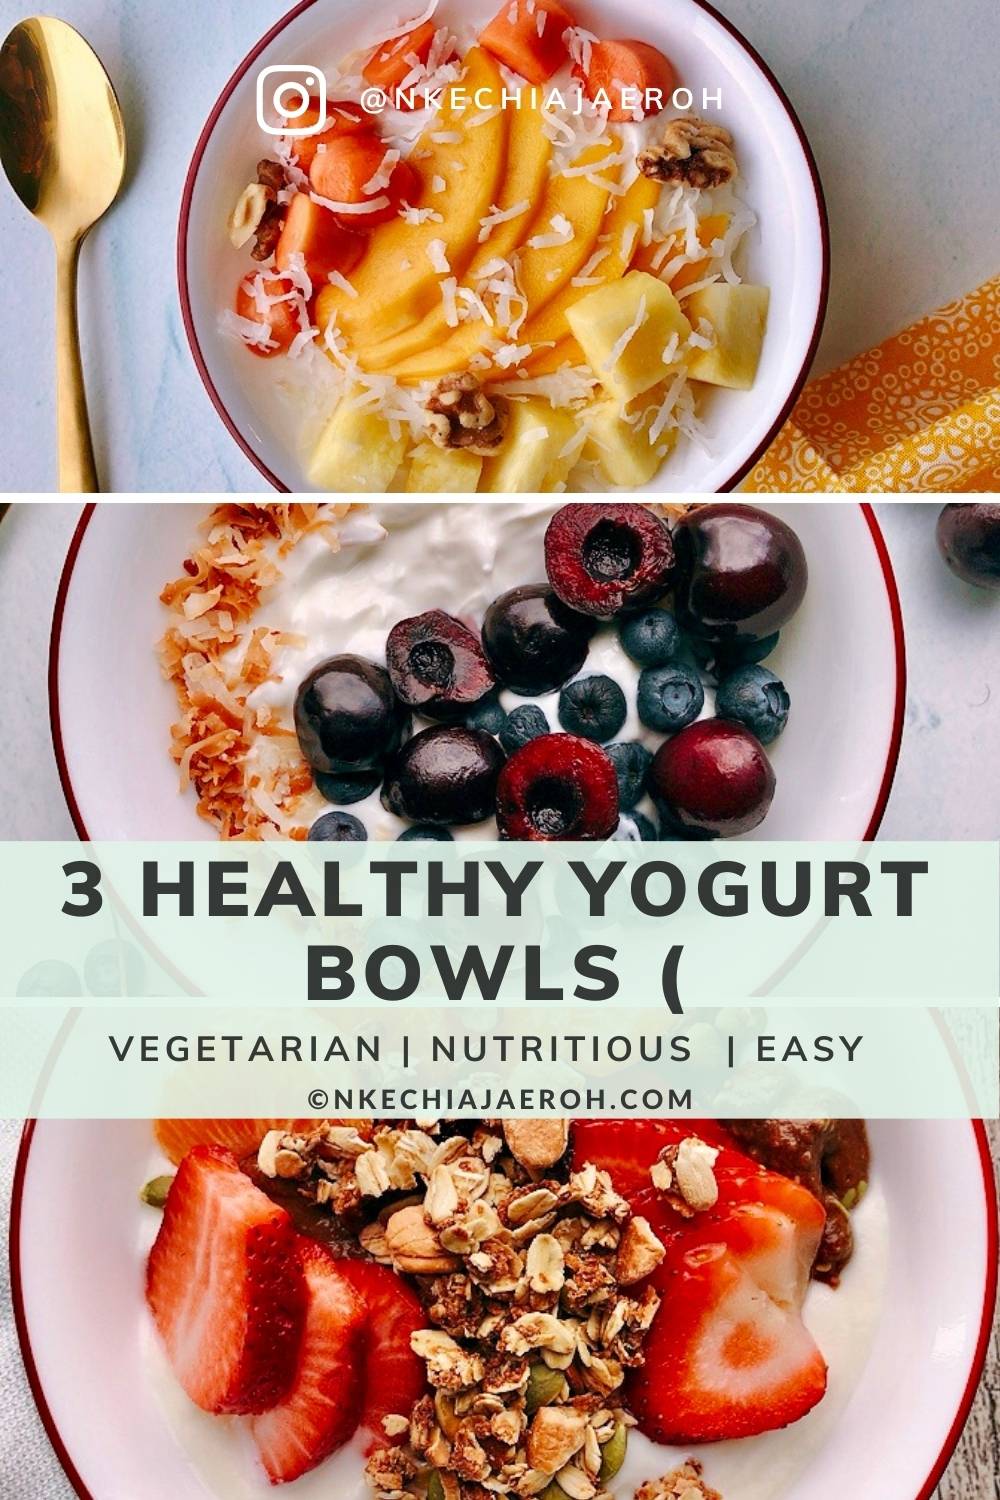 Yogurt bowl is an easy healthy breakfast that is packed with proteins, flavors, and deliciousness! Simply add any topping of choice, such as granola, fruits, or nut butter! Yogurt bowls are easy, cheap, nutritious, and make for an excellent breakfast when you are in a hurry! Say no to skipping breakfast! #yogurtbowl #yogurtrecipe #breakfastbowl 